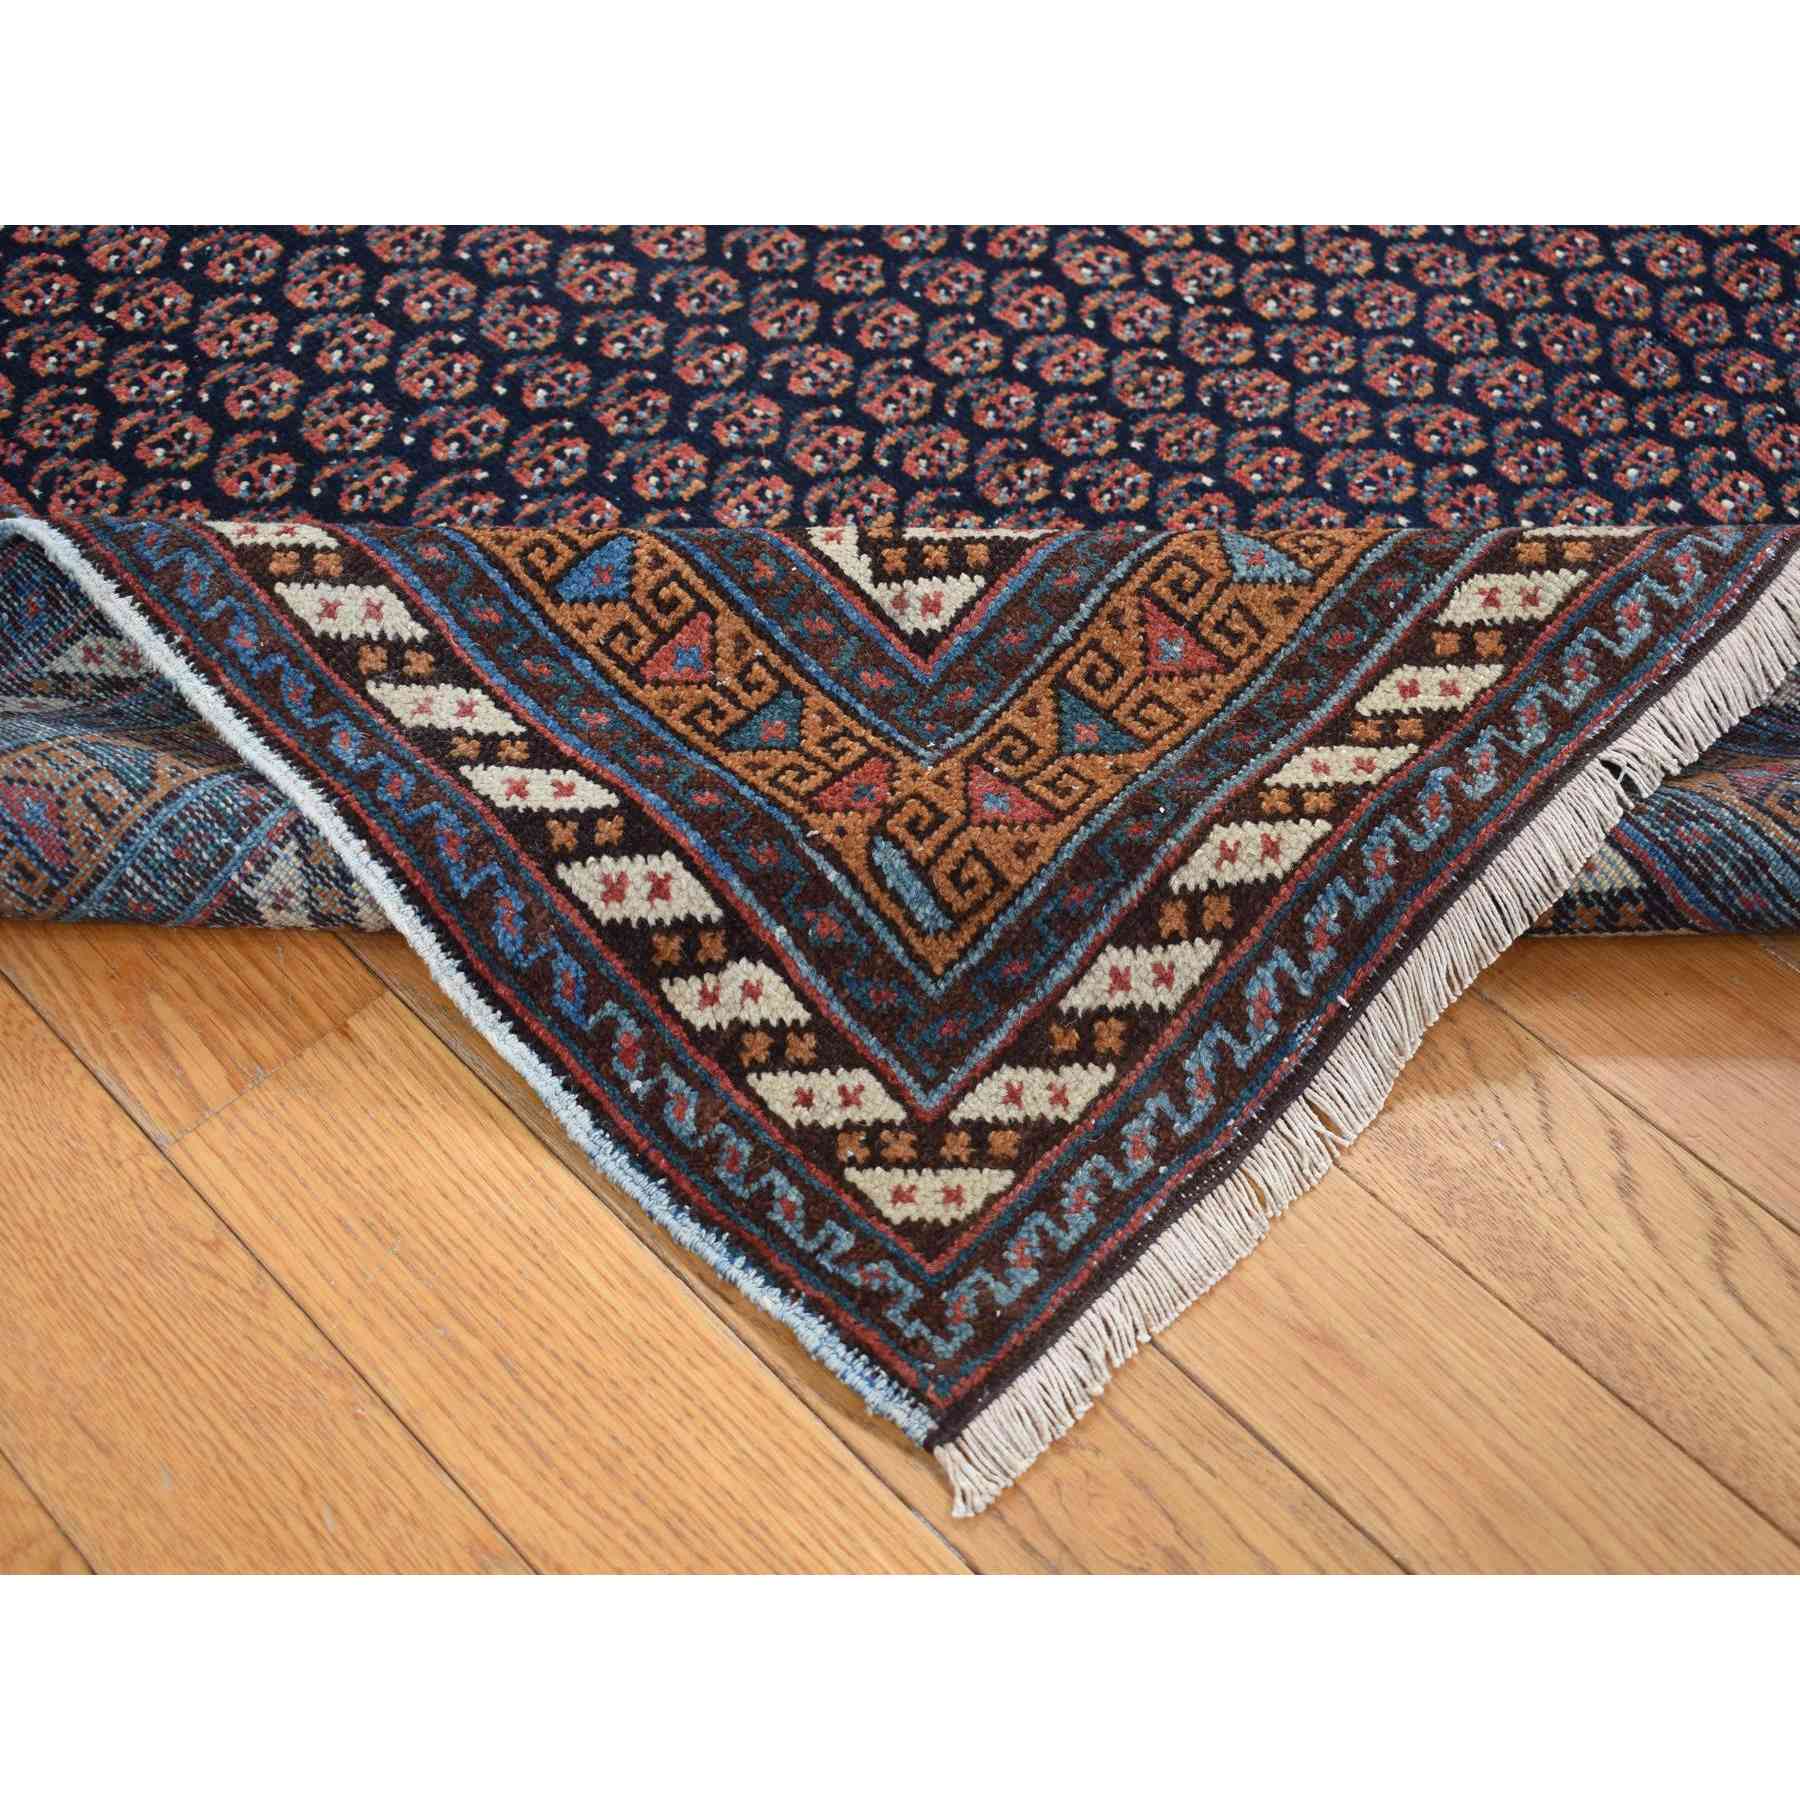 Antique-Hand-Knotted-Rug-437020